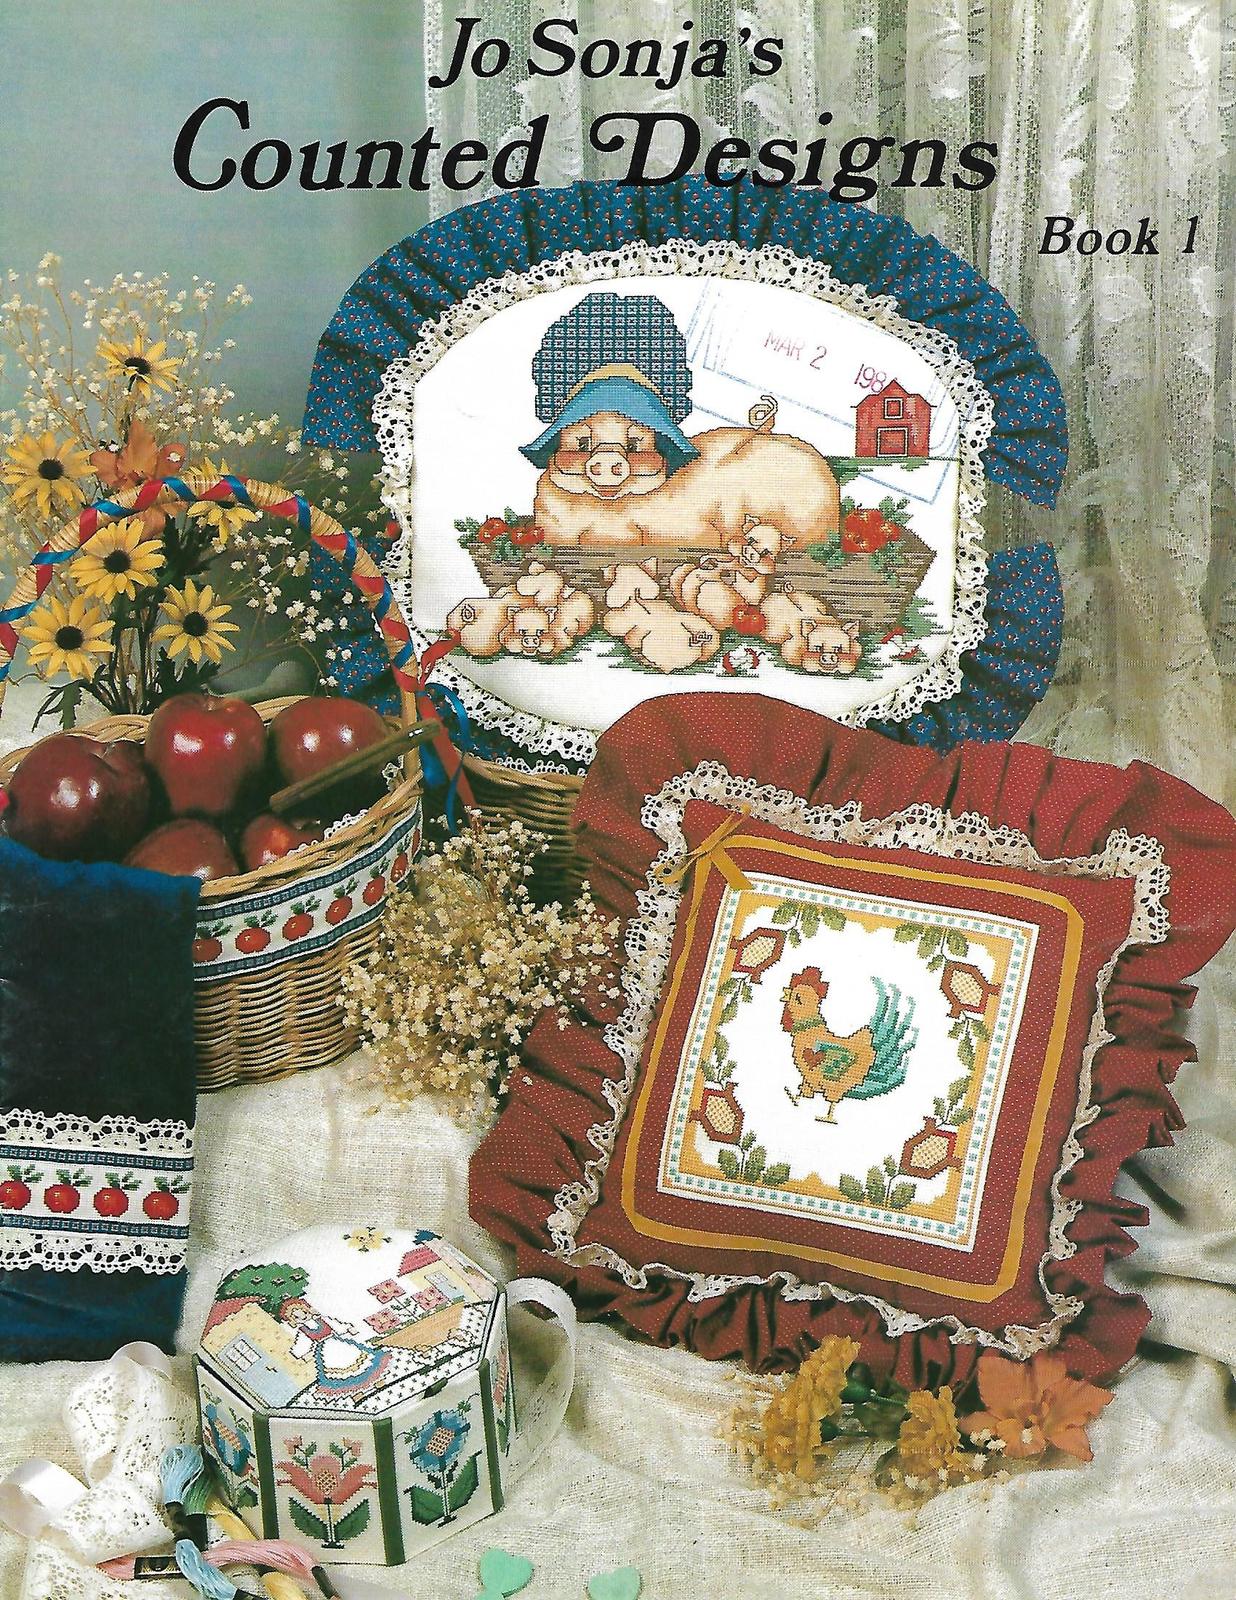 Jo Sonja's Counted Designs Books 1-2-4. and 50 similar items